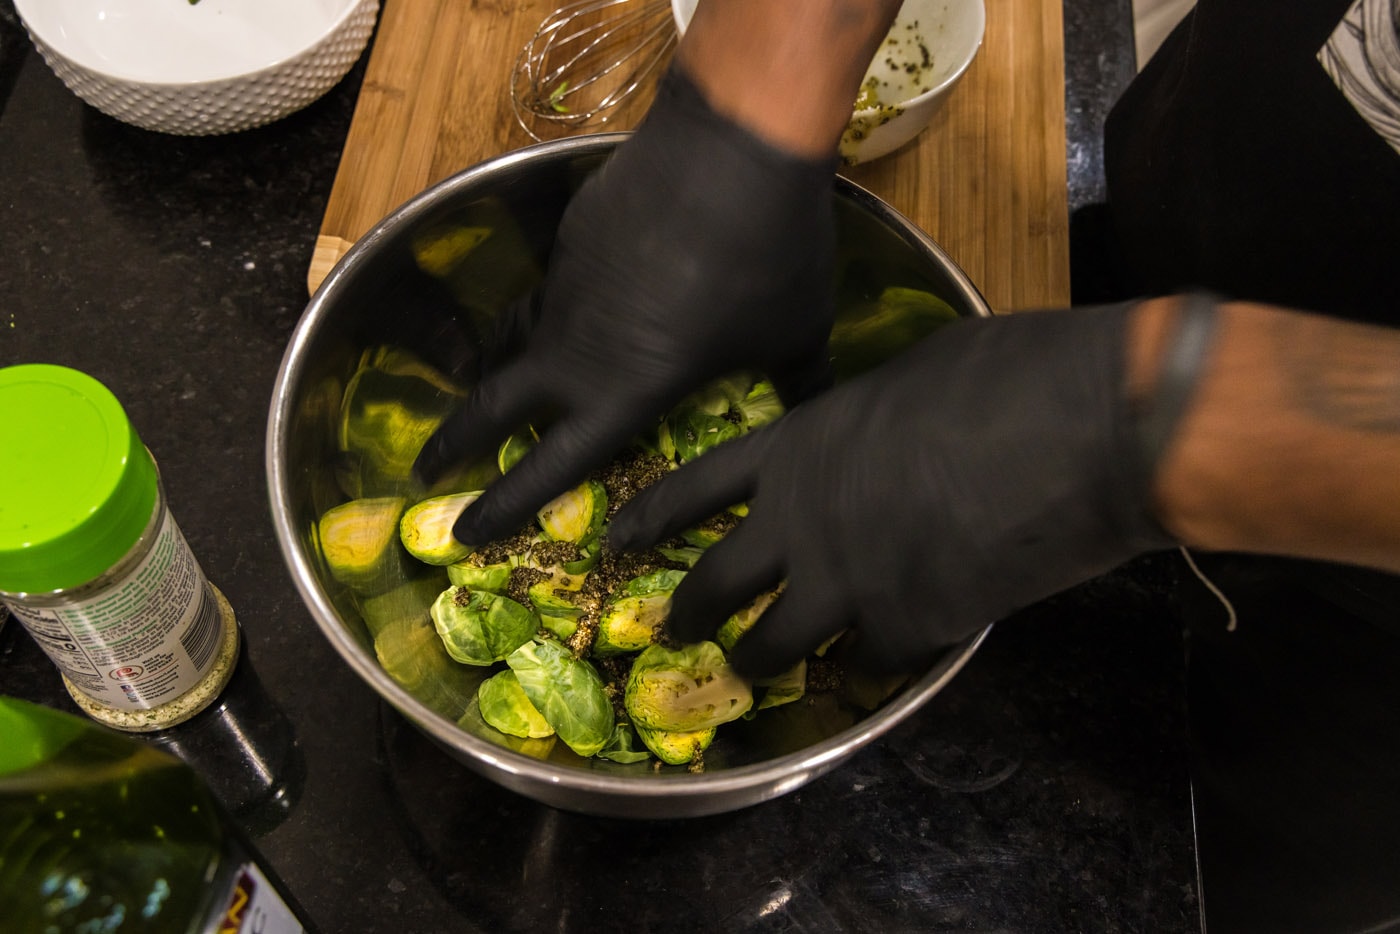 hands mixing brussels sprouts with oil and seasonings